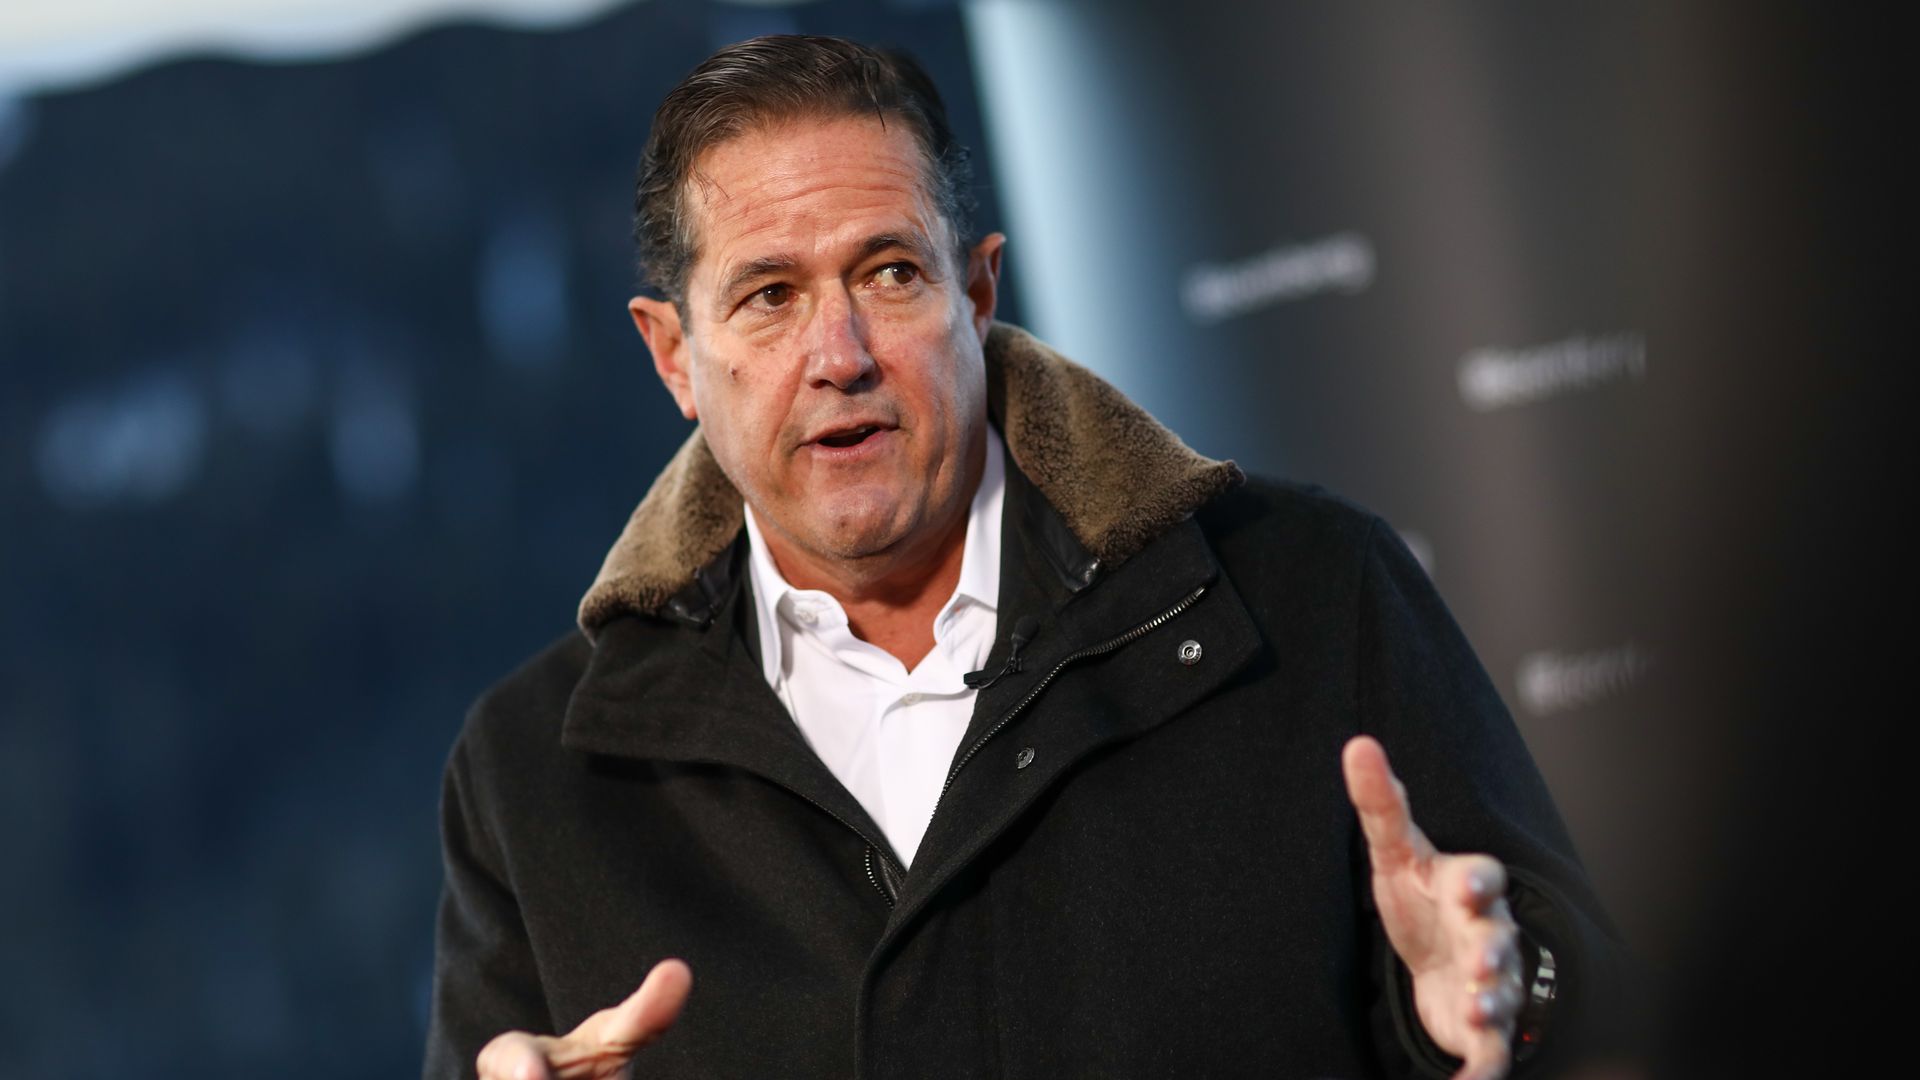 Barclay CEO James Staley speaking in Davos, Switzerland, in January 2020.